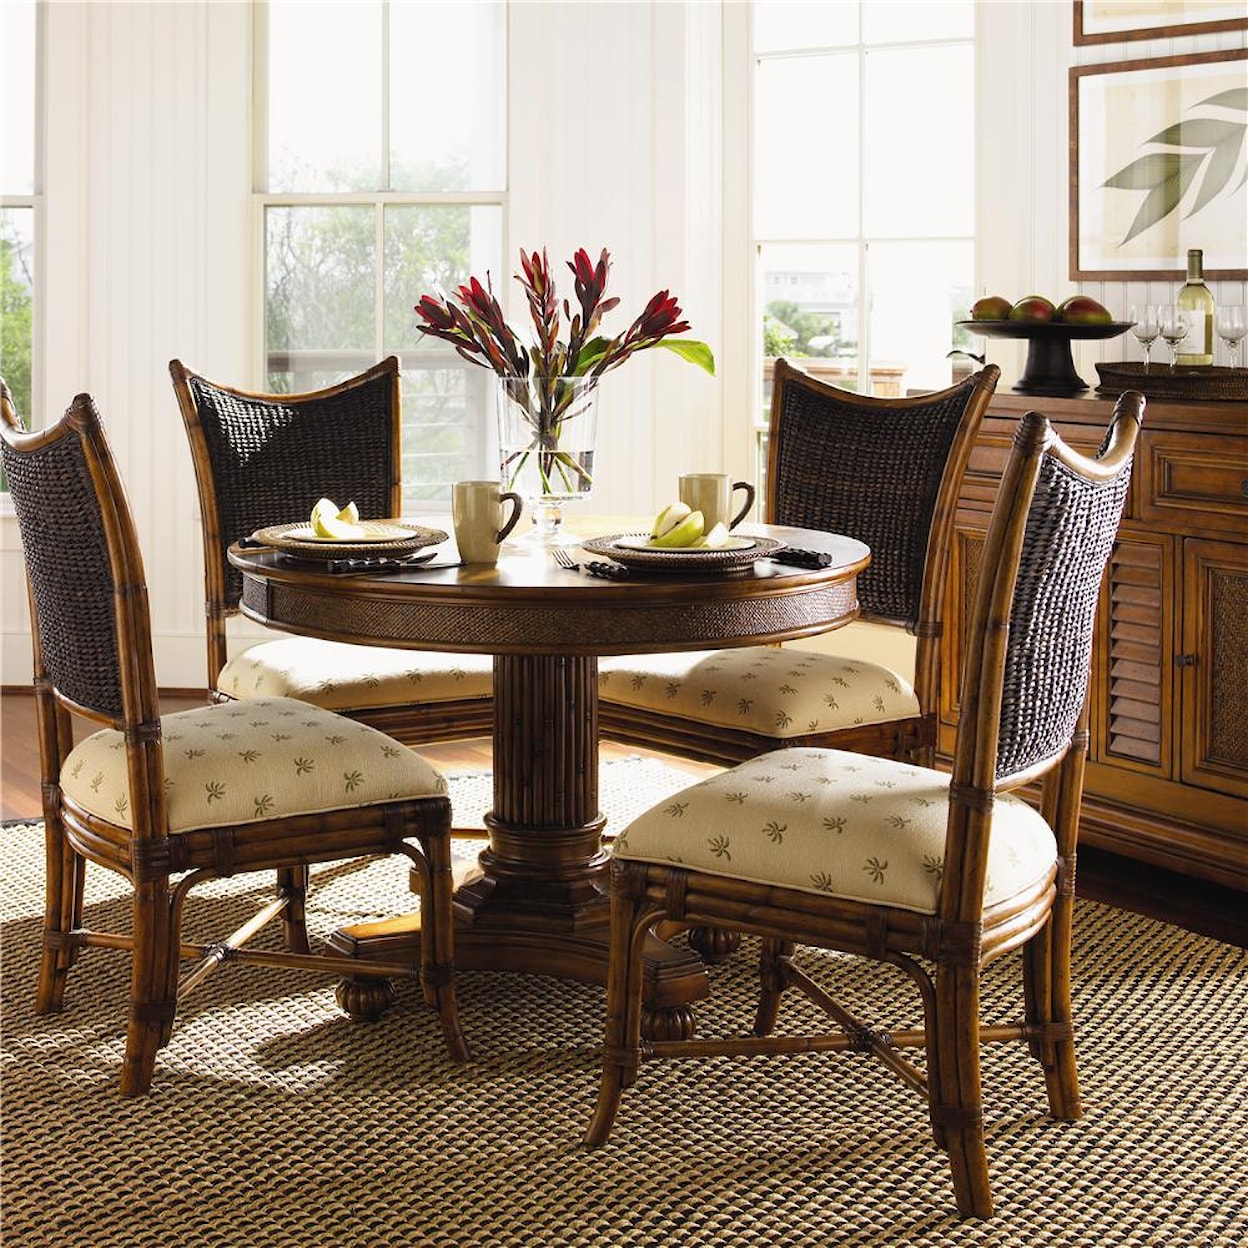 Tommy Bahama Home Island Estate 5 Piece Cayman Kitchen Table Dining Set